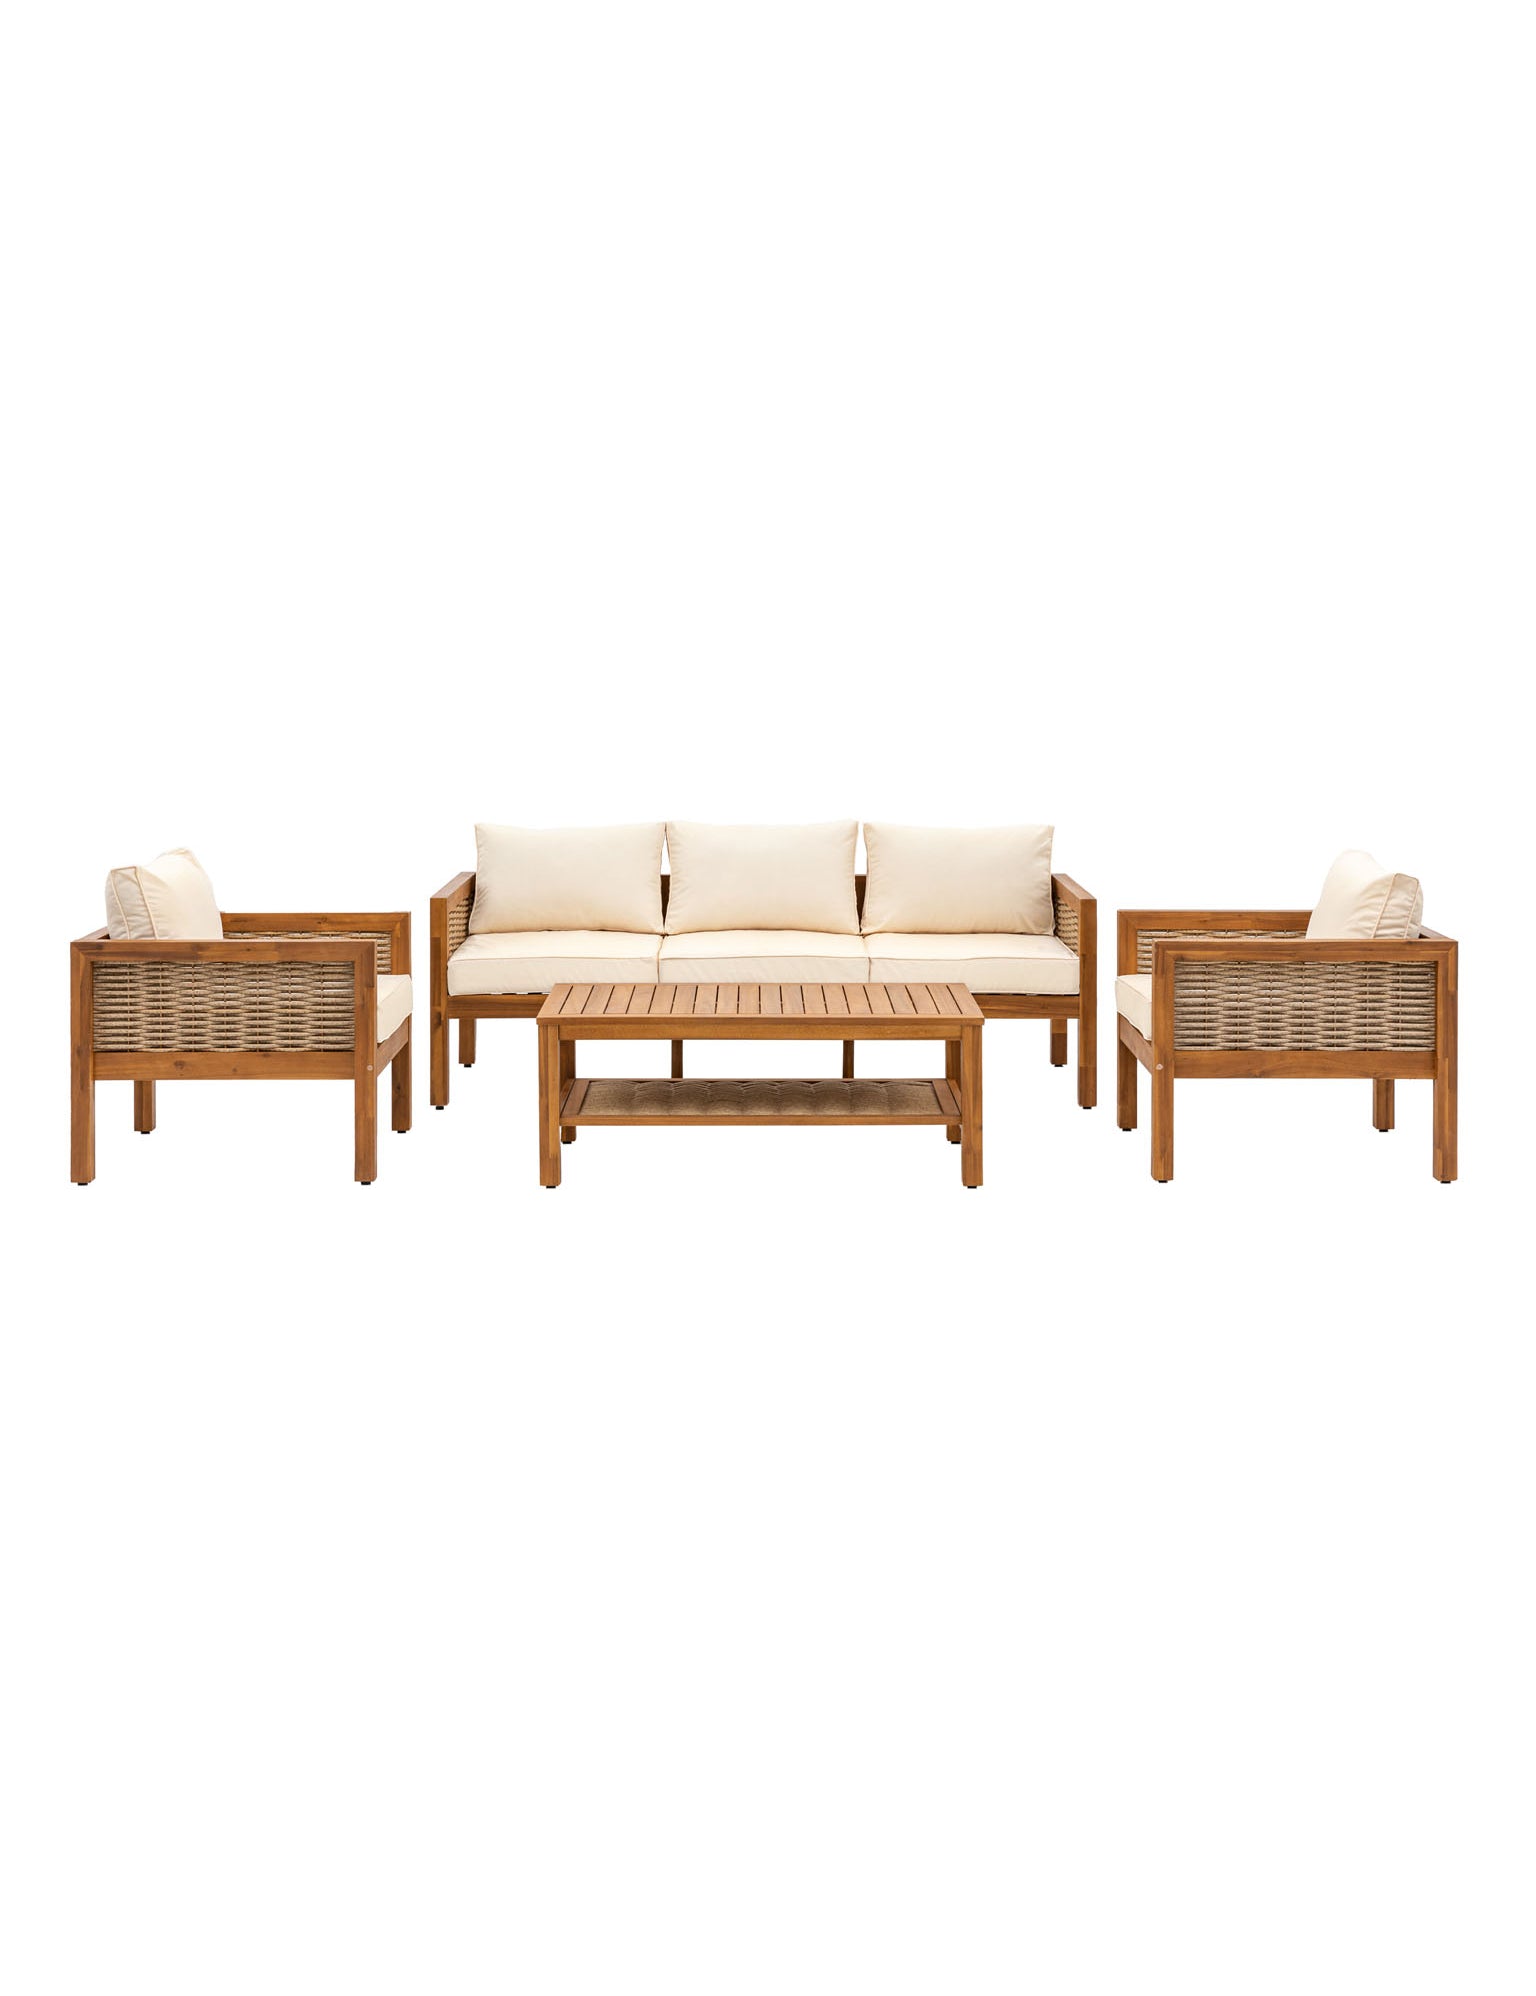 Garden lounge set in acacia wood and wicker